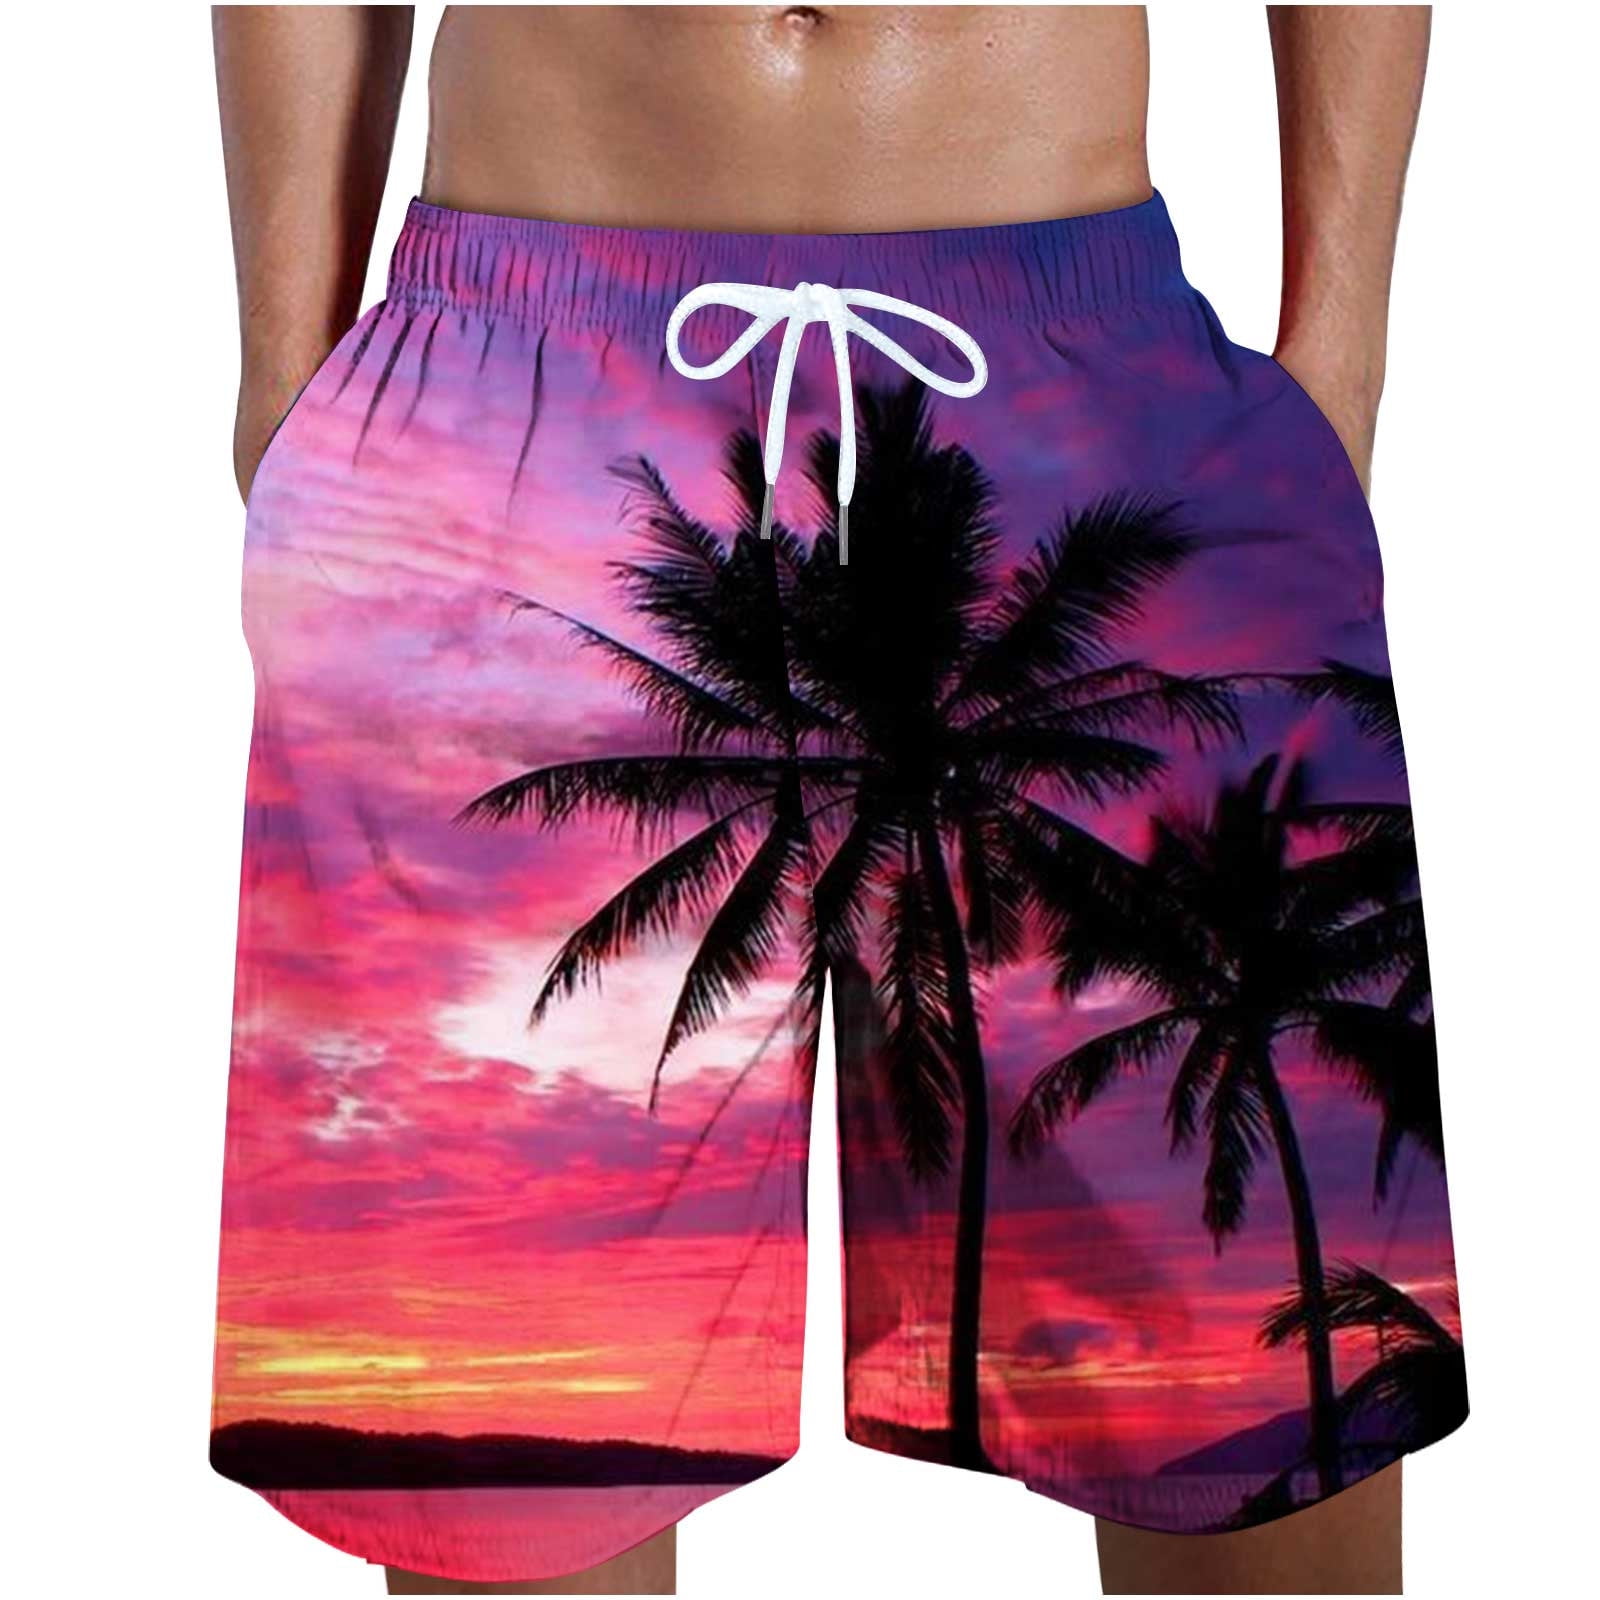 Hot6sl Beach Shorts for Men, Shorts Men Men's Swim Trunks Beach Board  Shorts Quick Dry Bathing Suits Holiday Shorts with Pockets Under 10.00  Dollar Items Purple M 